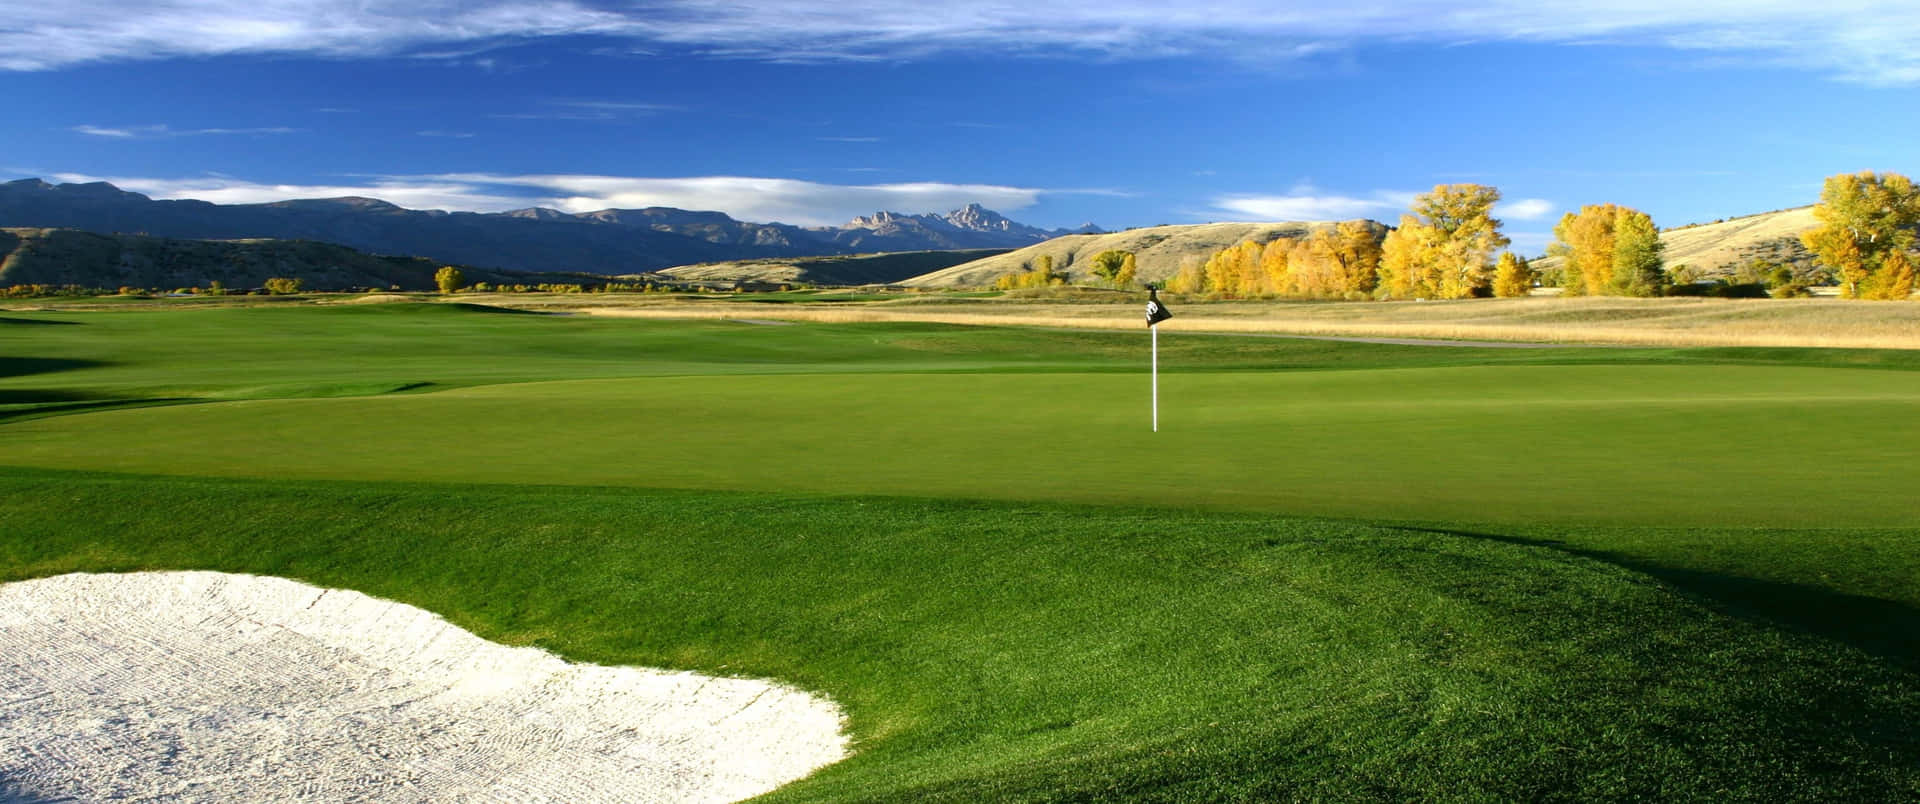 Swing into the perfection with this stunning 3440x1440p golf course background.